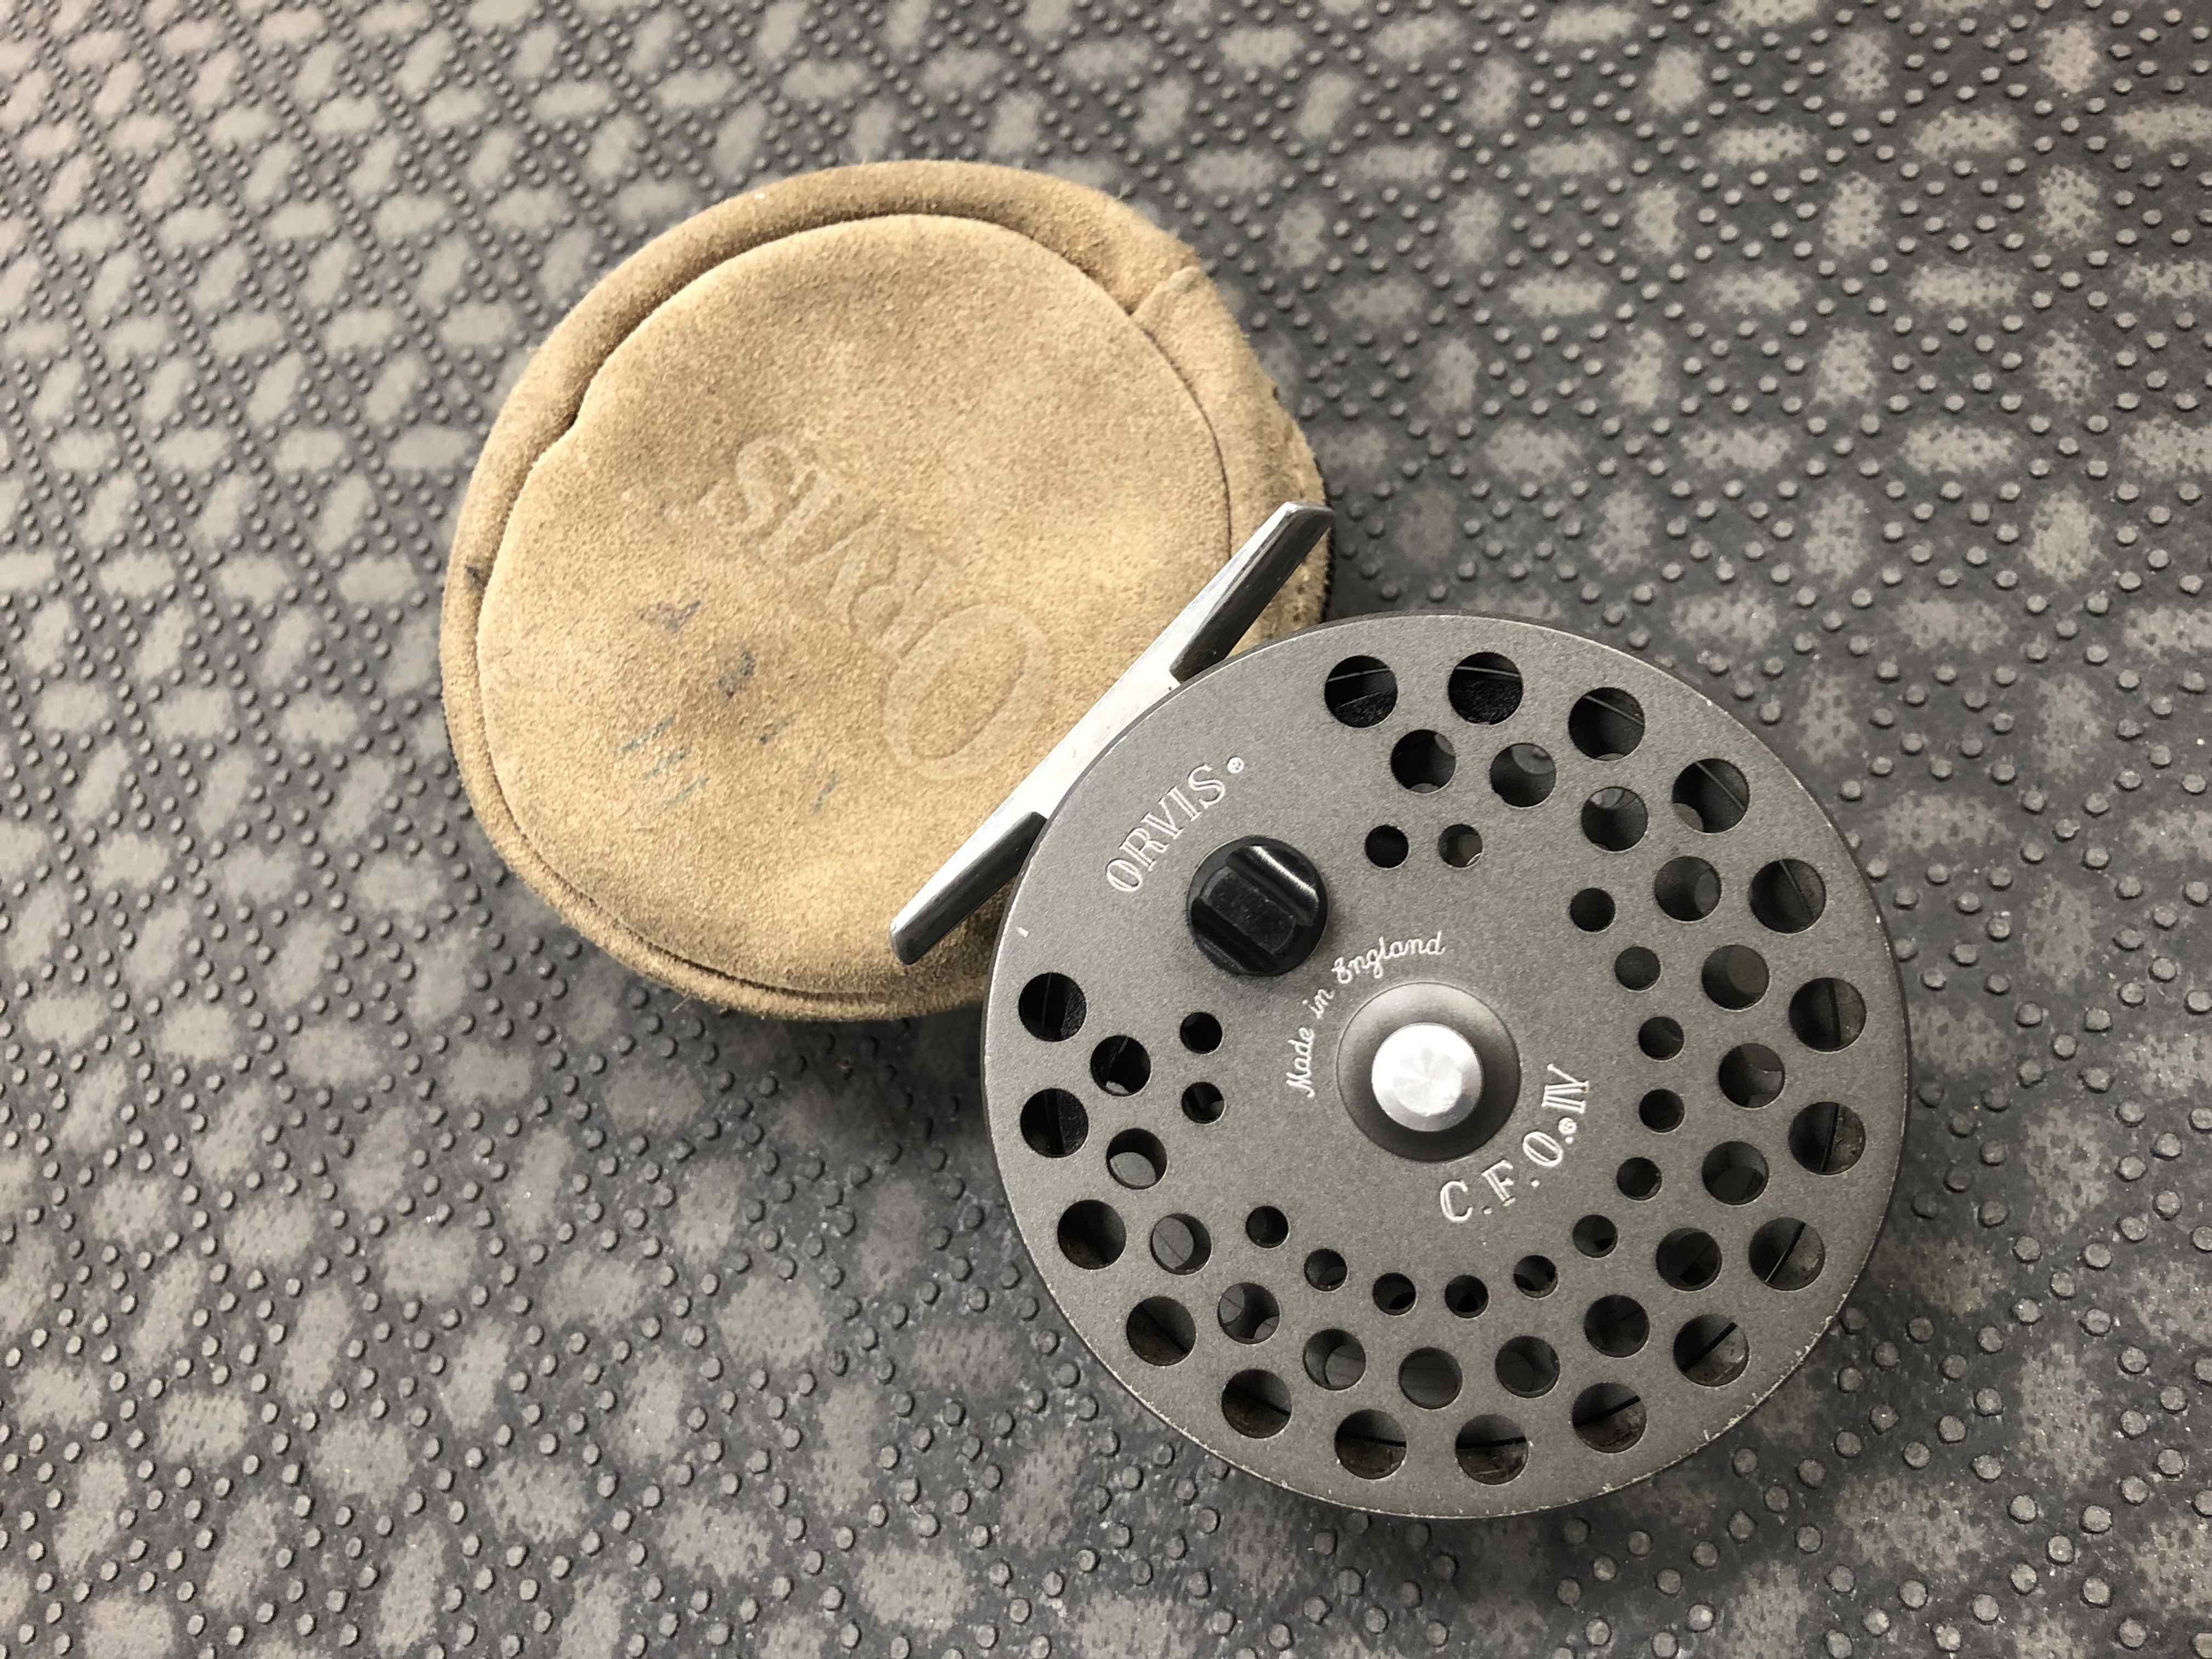 https://thefirstcast.ca/wp-content/uploads/2018/02/Orvis-CFO-iV-Made-in-england-Fly-Reel-and-Pouch-AA.jpg